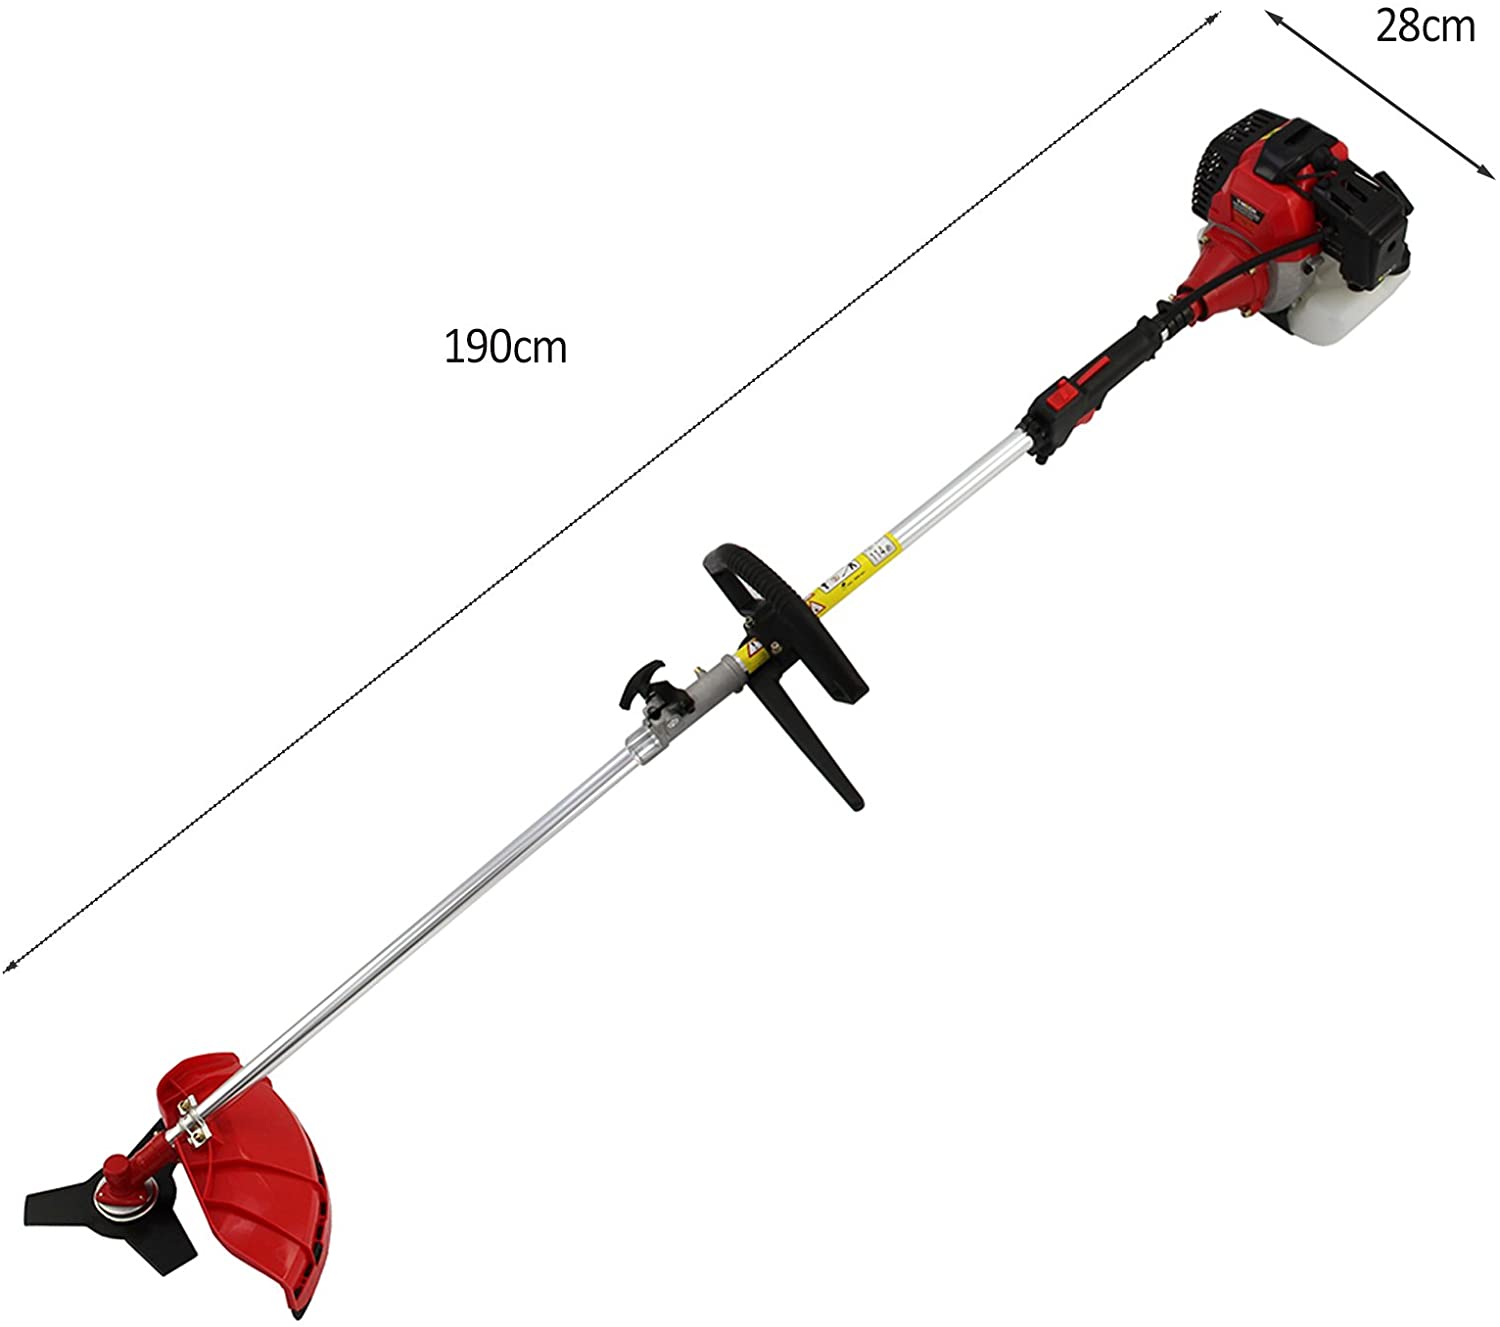 High-Powered Brush Weed Cutter Saw Hedge Trimmer 4 In 1 - The Shopsite